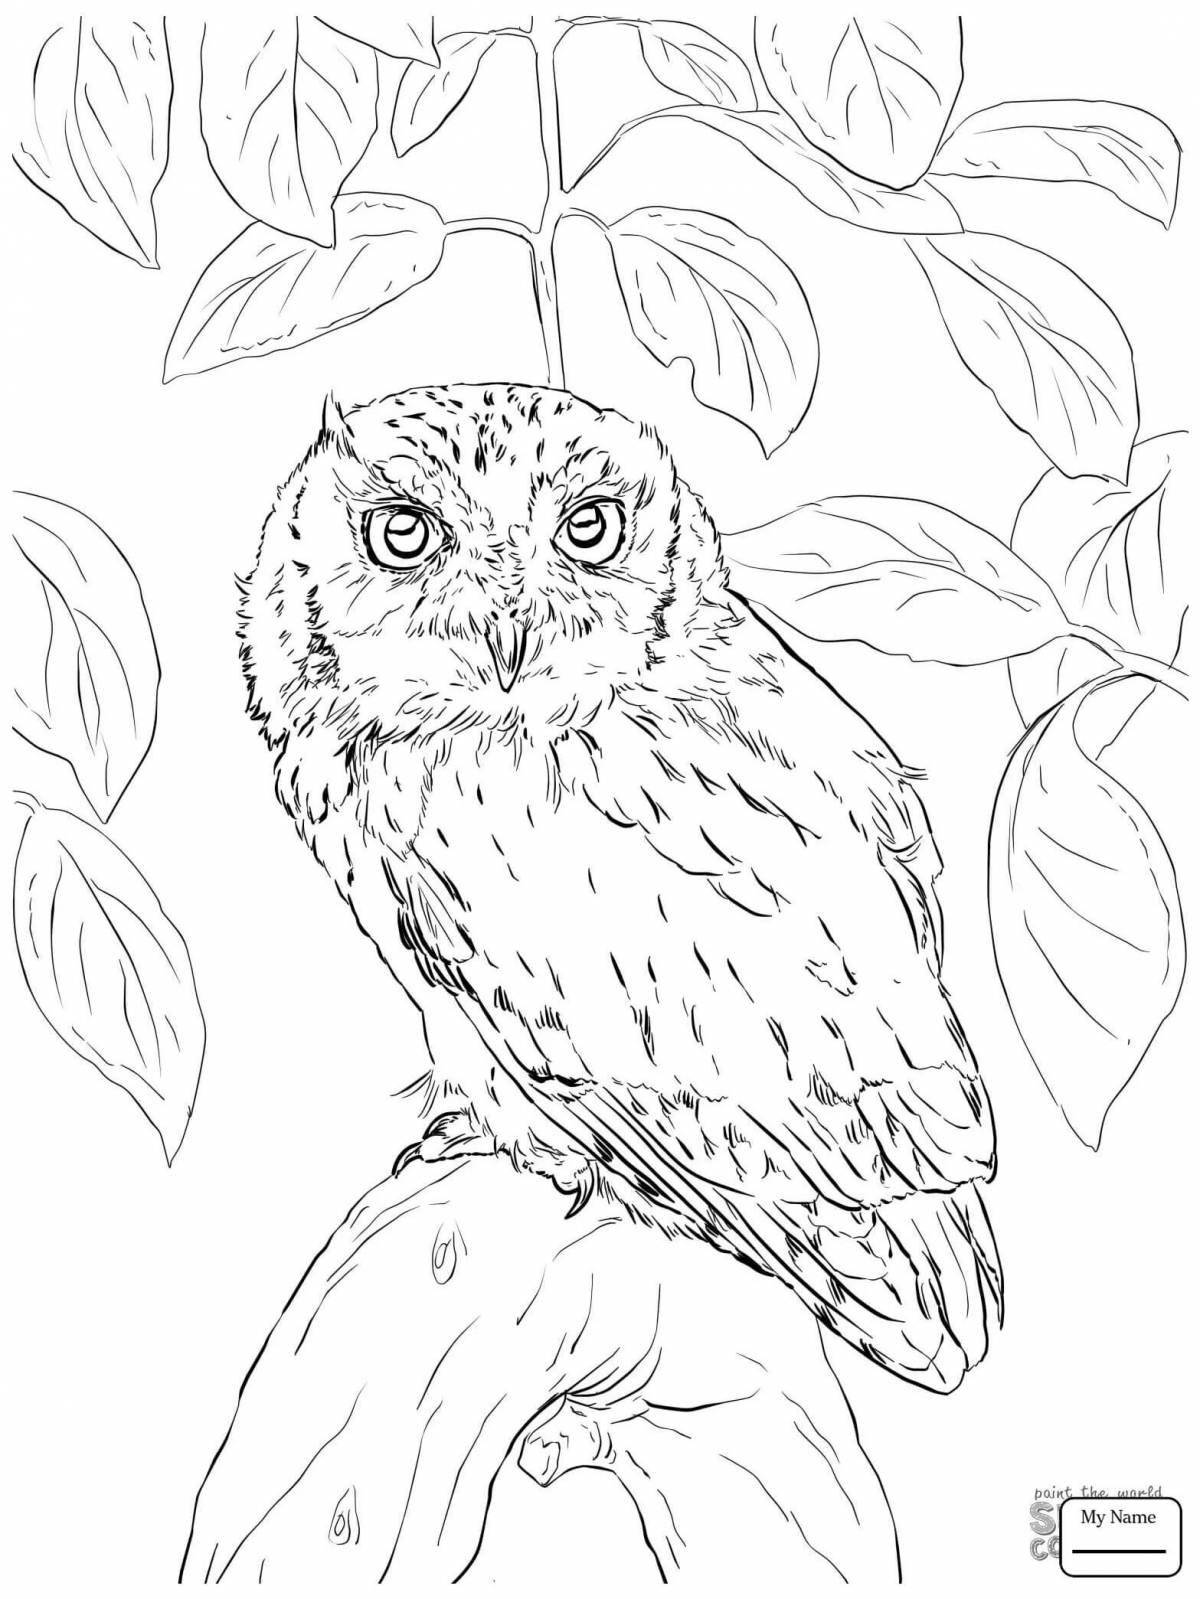 Bright snowy owl coloring pages for kids